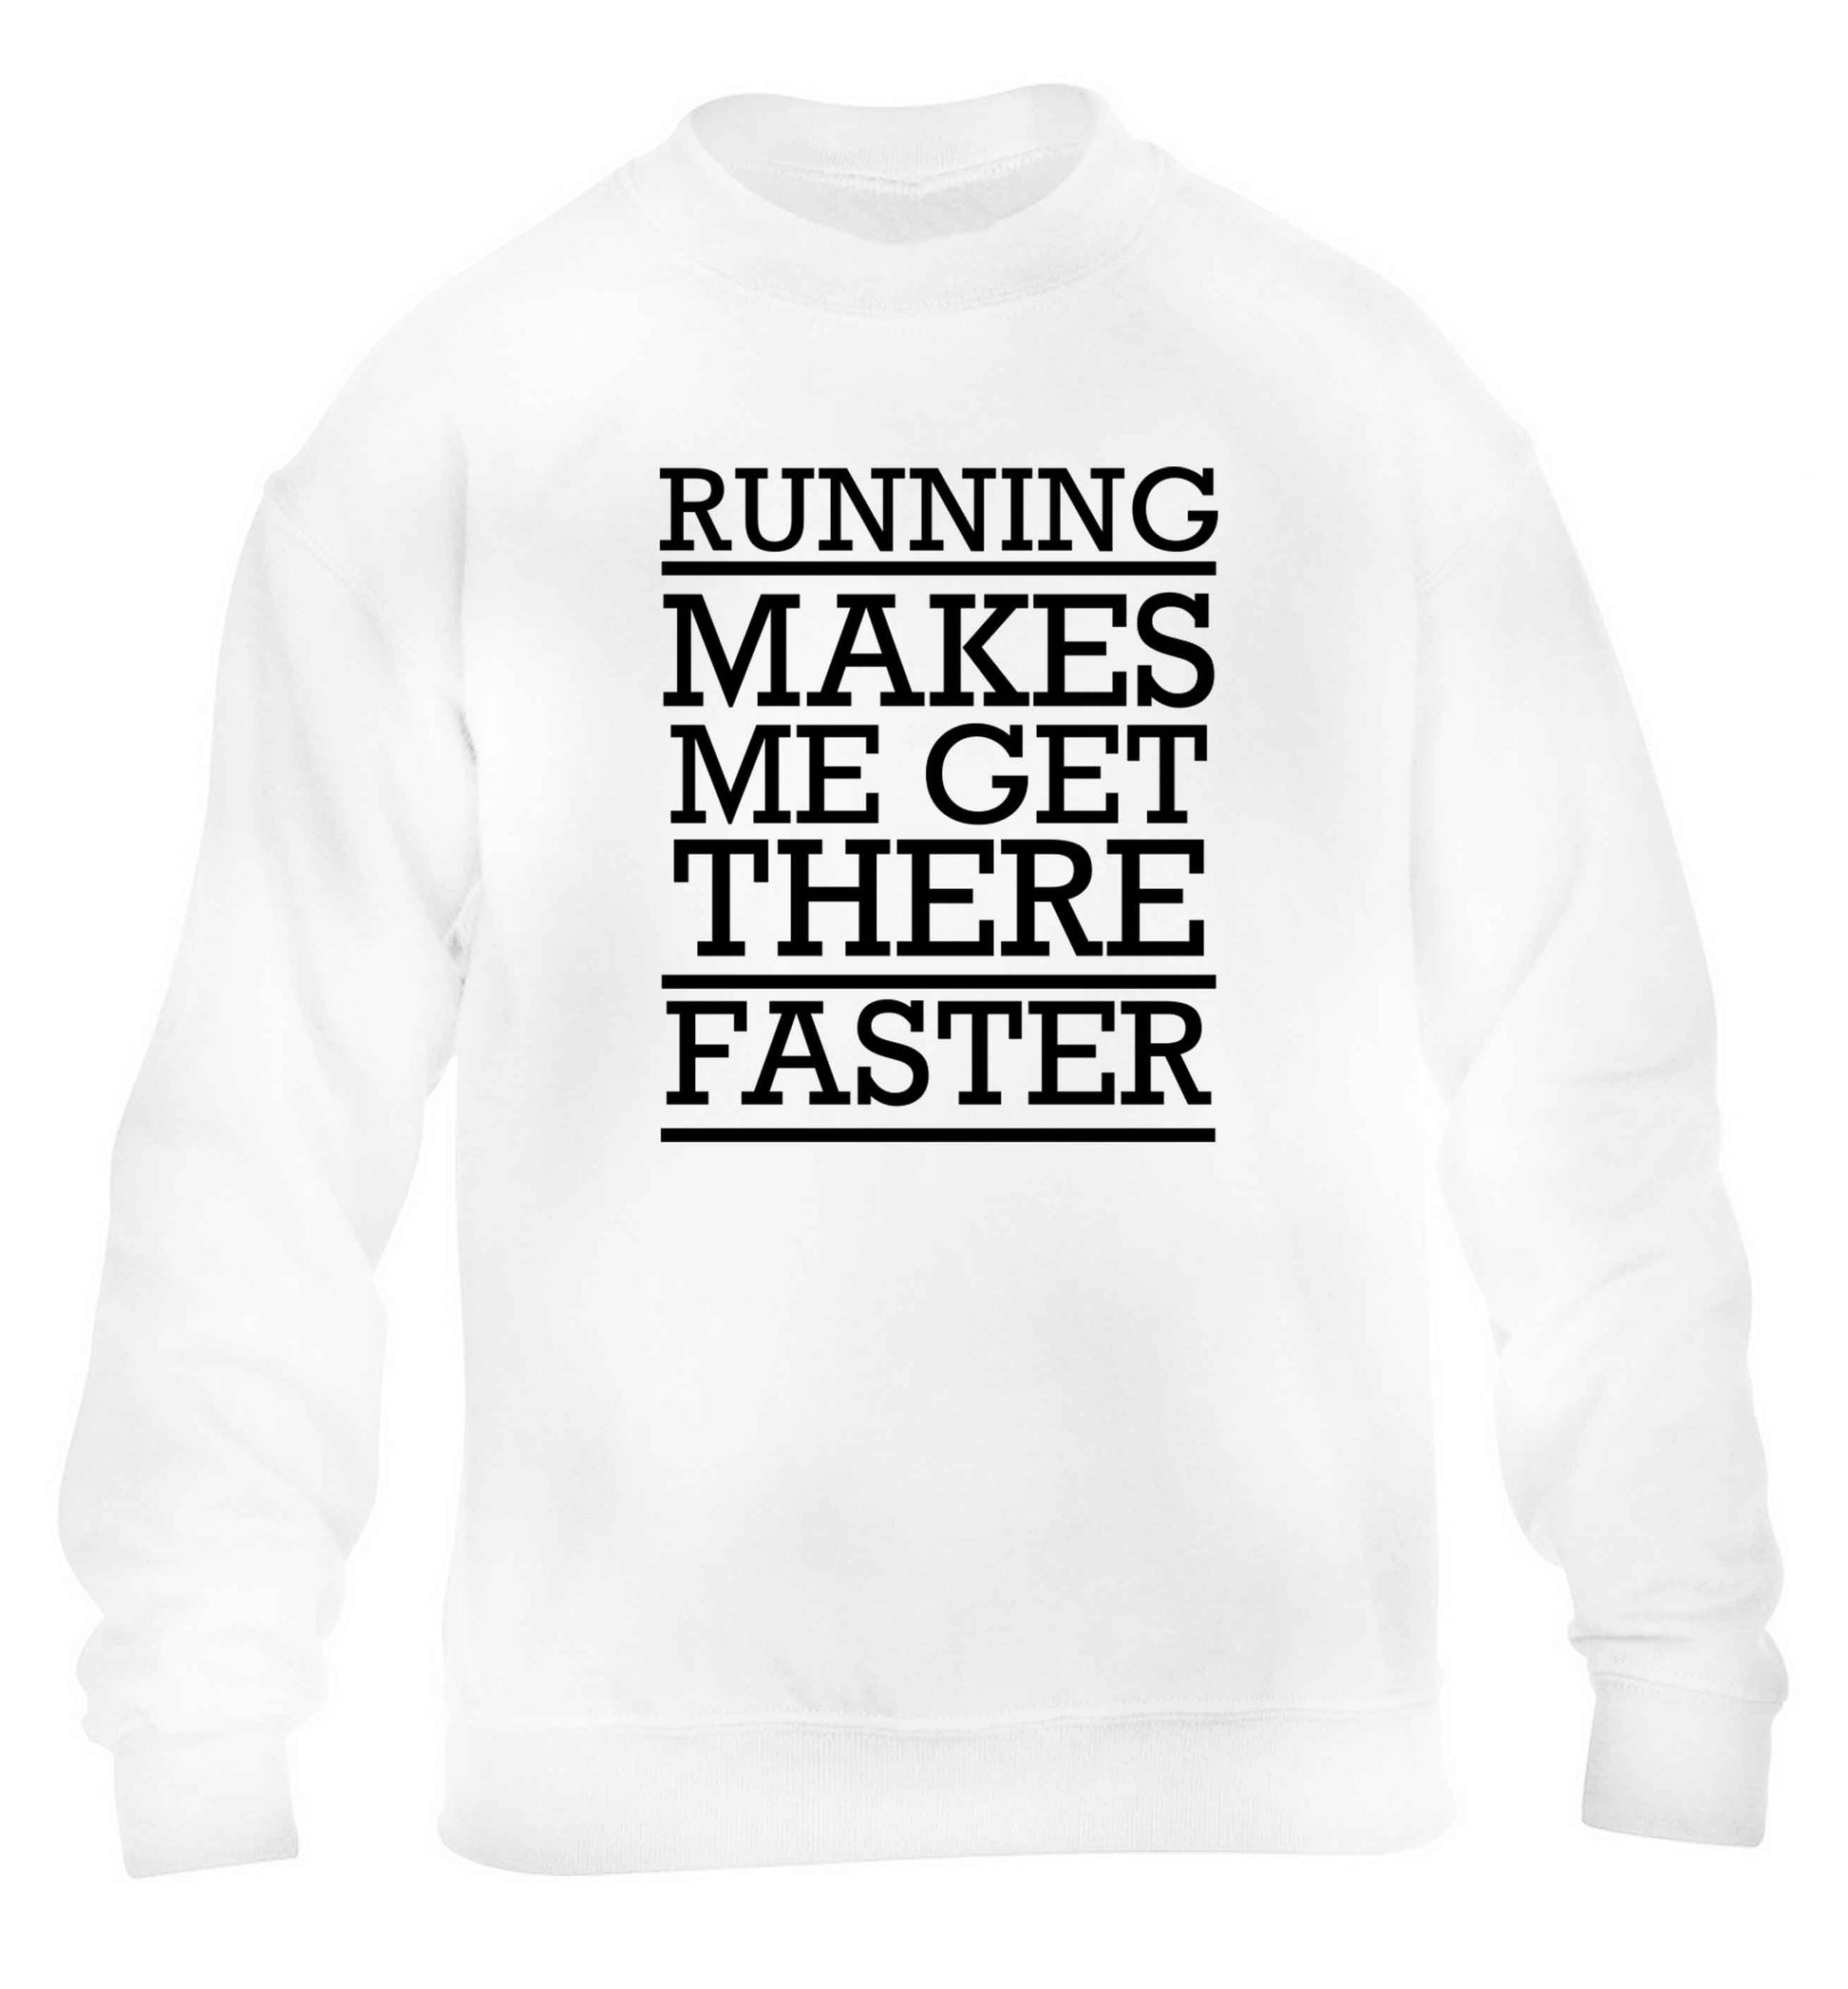 Running makes me get there faster children's white sweater 12-13 Years